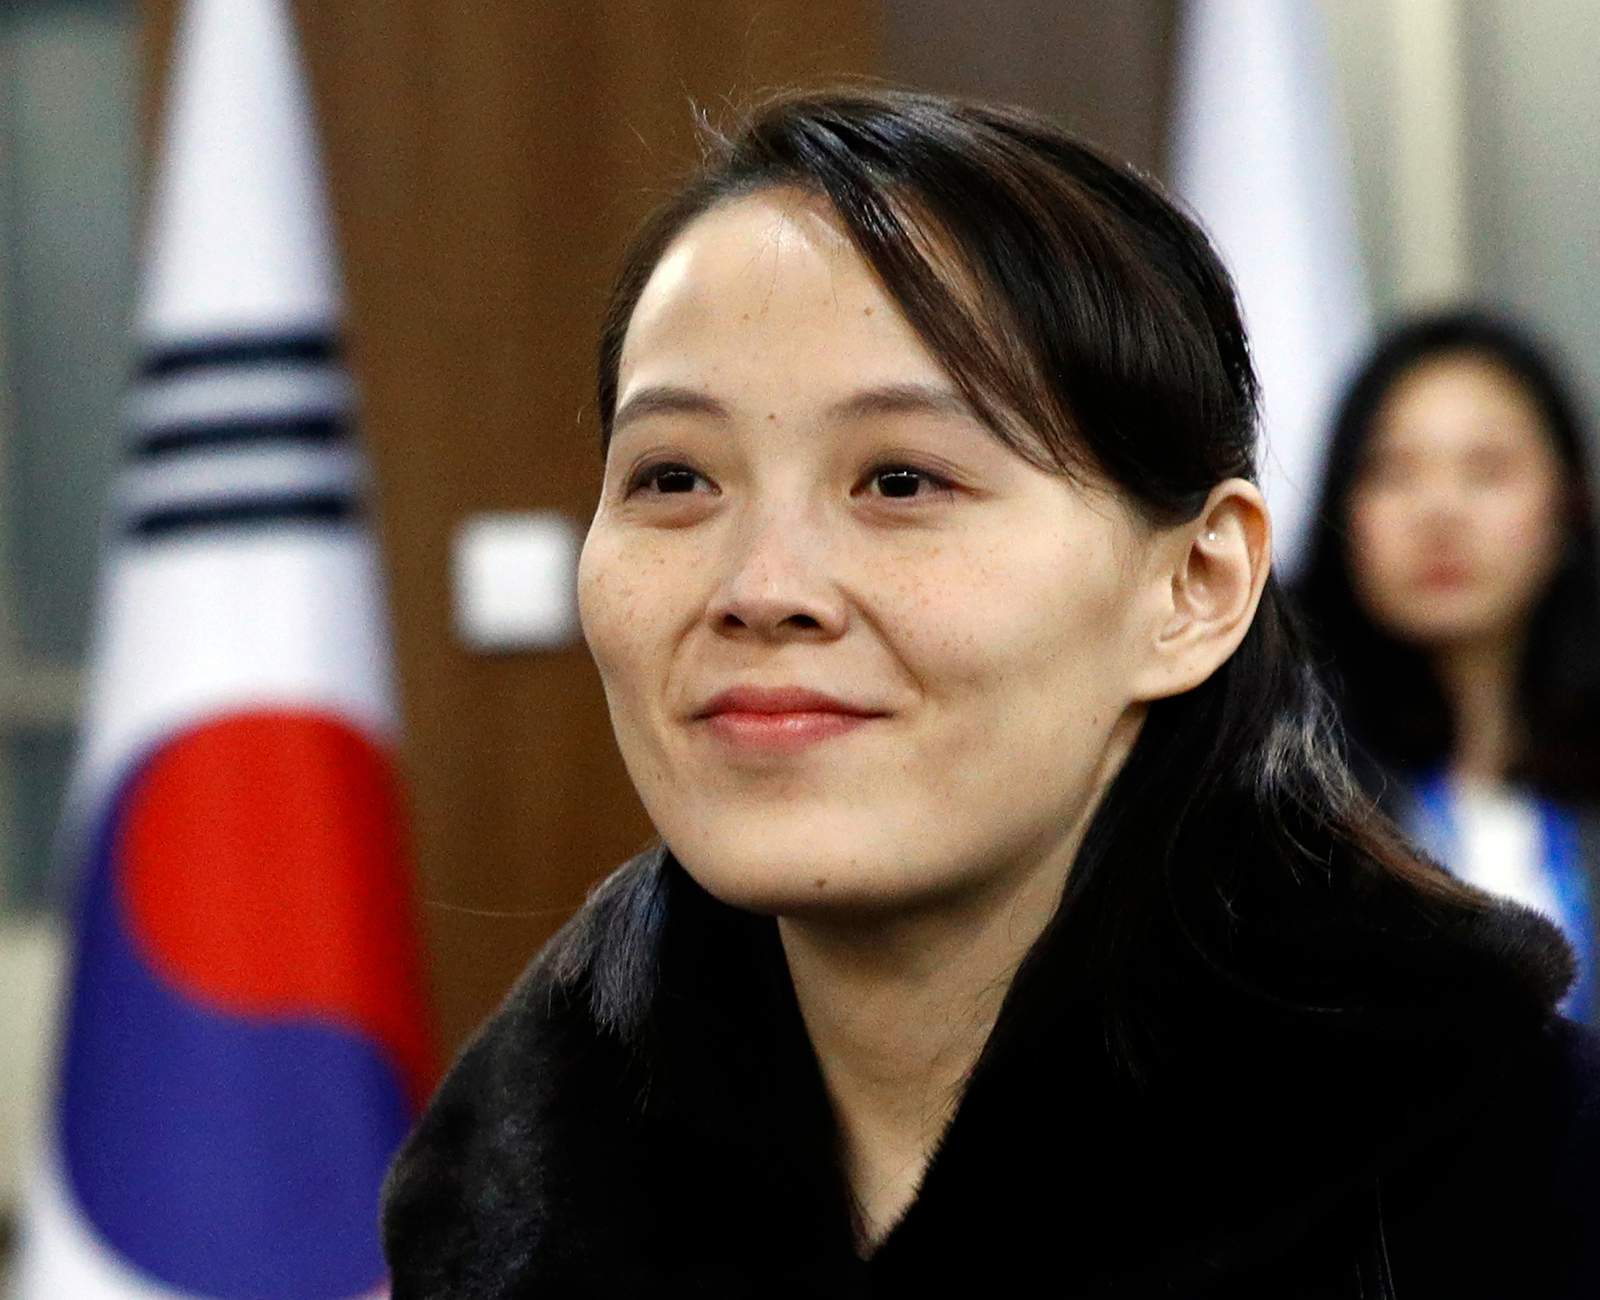 Demoted? Pushed aside? Fate of Kim Jong Un's sister unclear